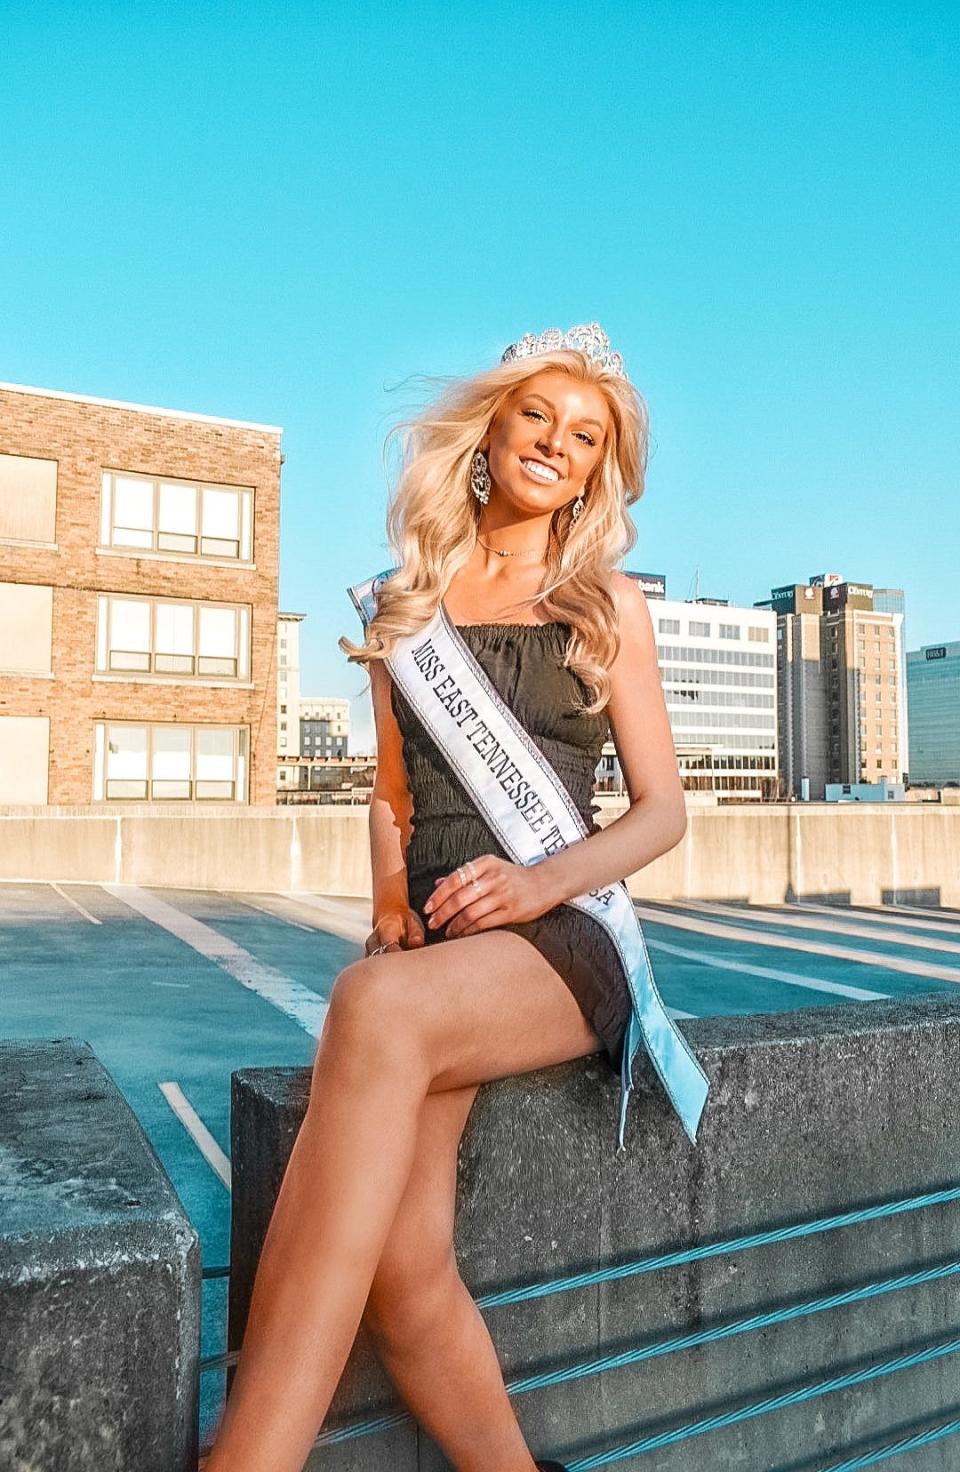 Keelie McLawhorn, 17, poses wearing her 2021 Miss East Tennessee USA crown and sash in downtown Knoxville, Saturday, Jan. 24, 2021.